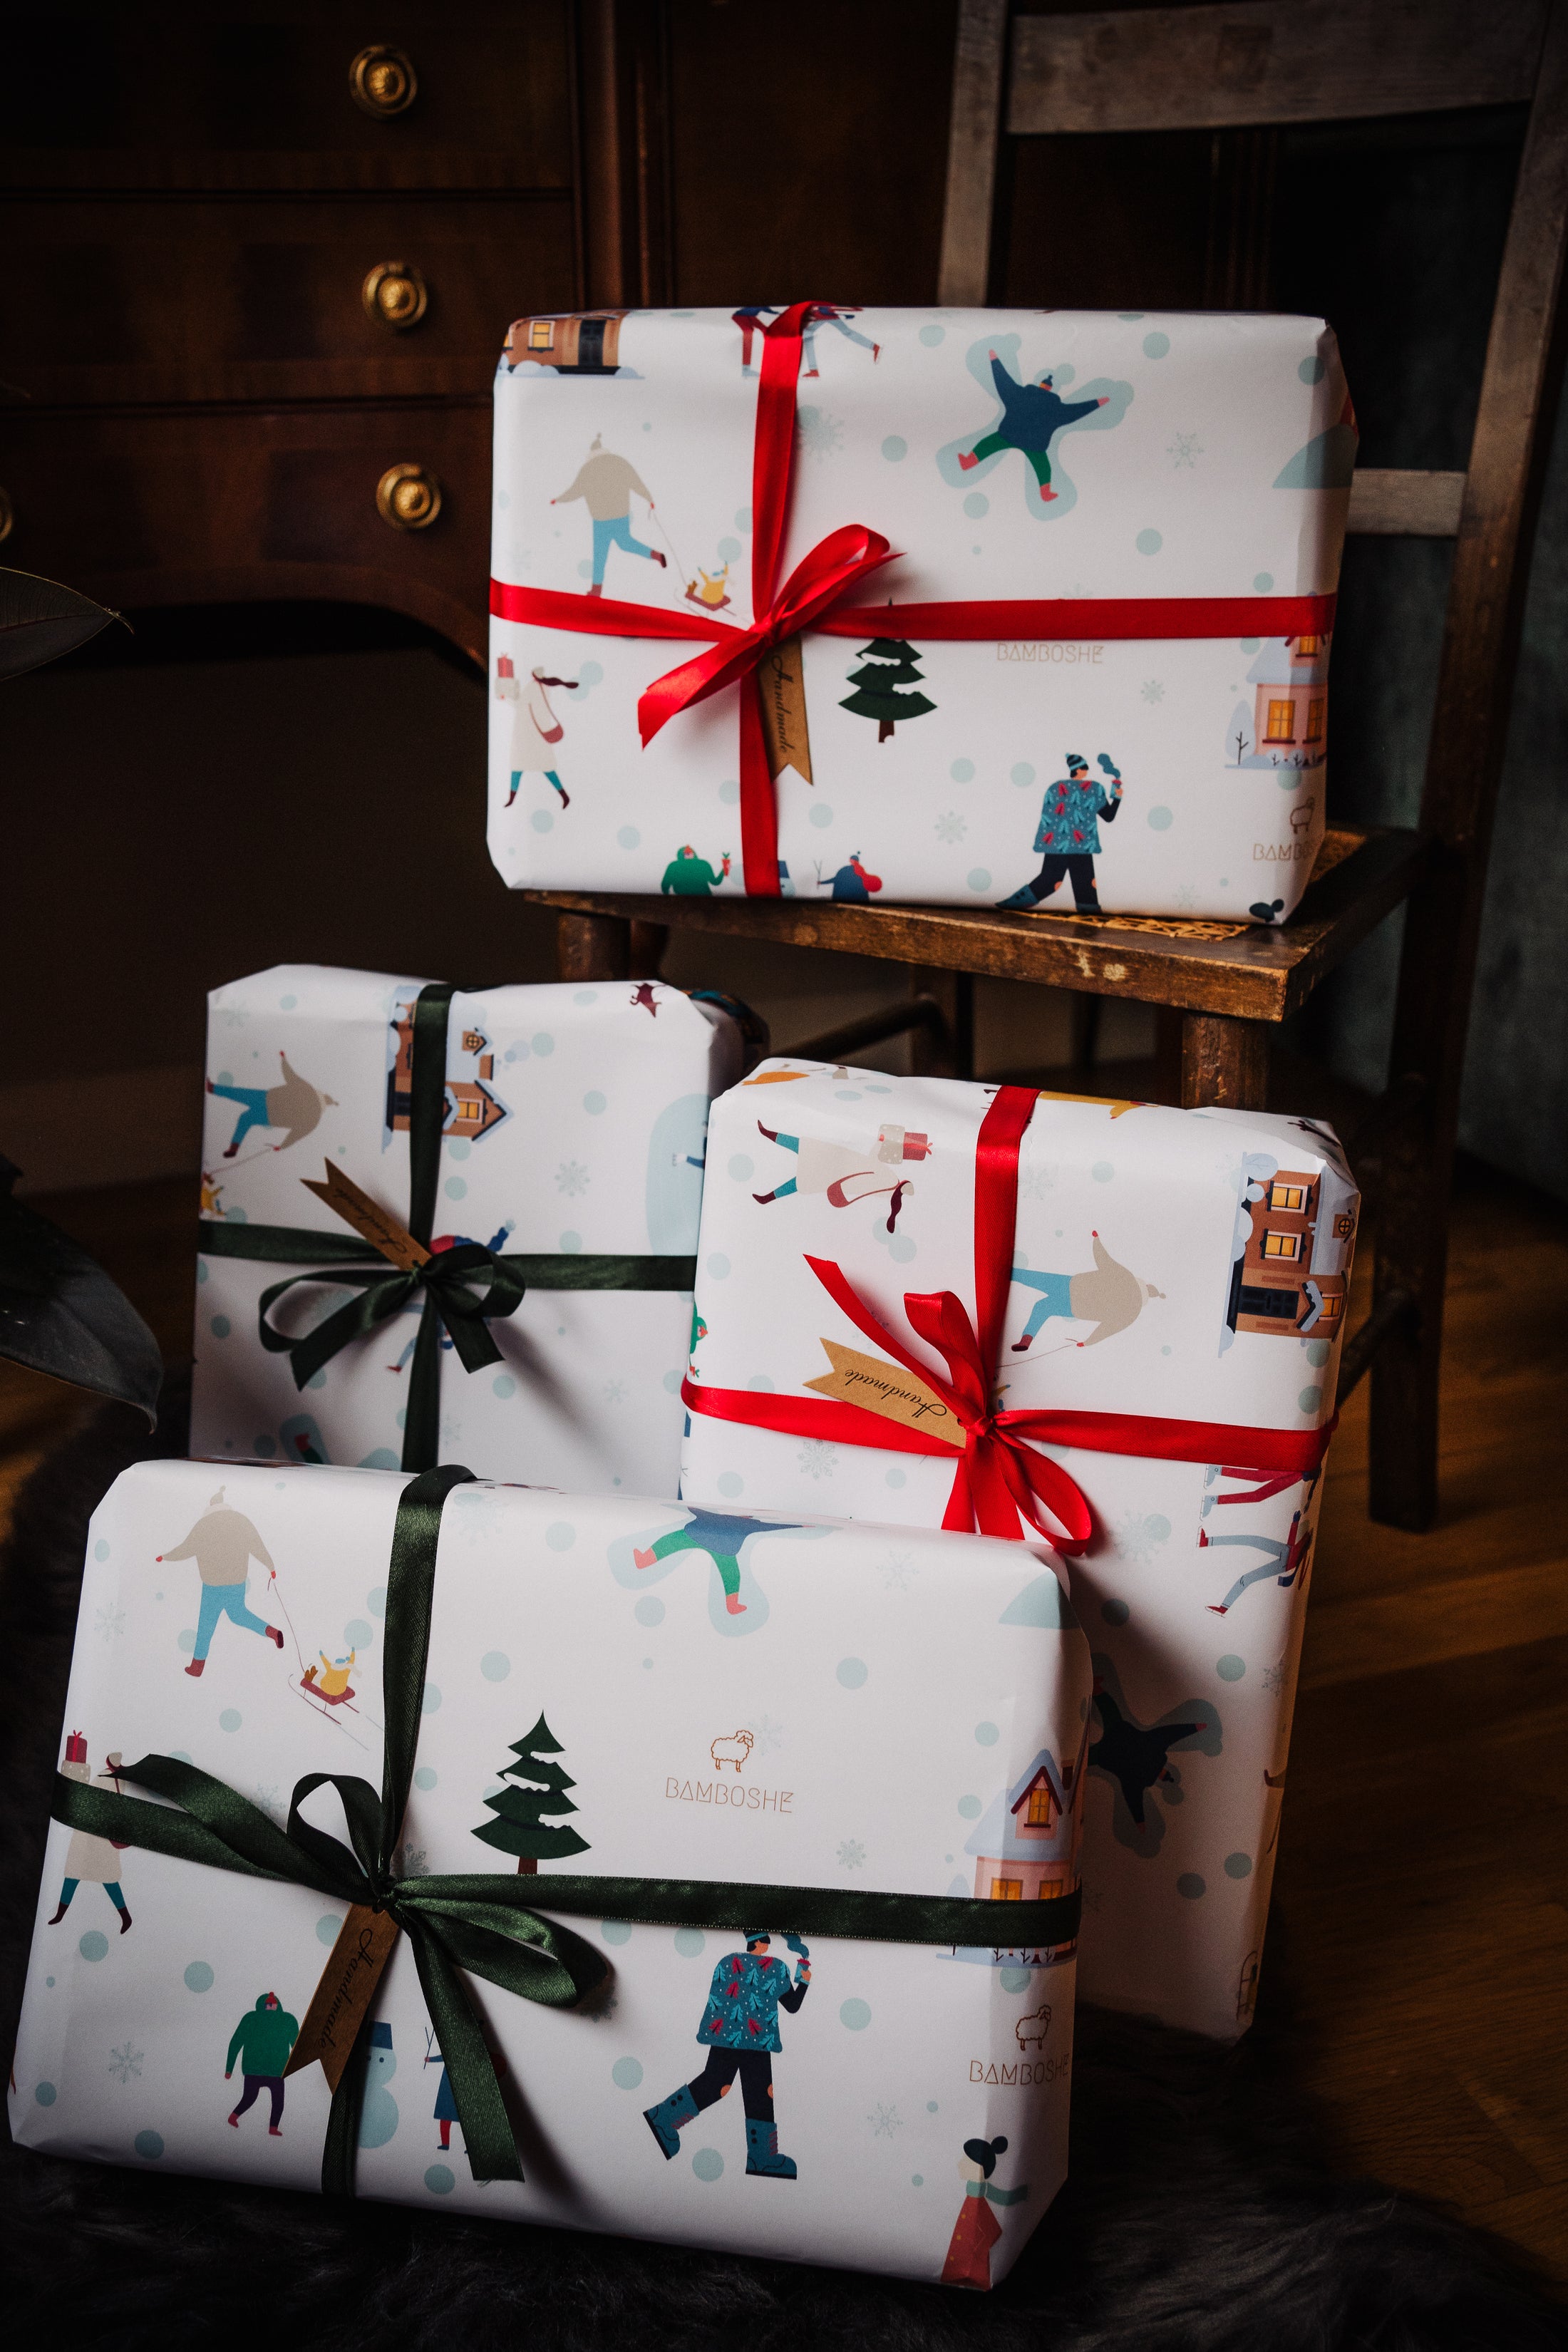 Beautifully packaged gifts with meticulous care, featuring Bamboshe gift wrapping adorned with green and red ribbons.